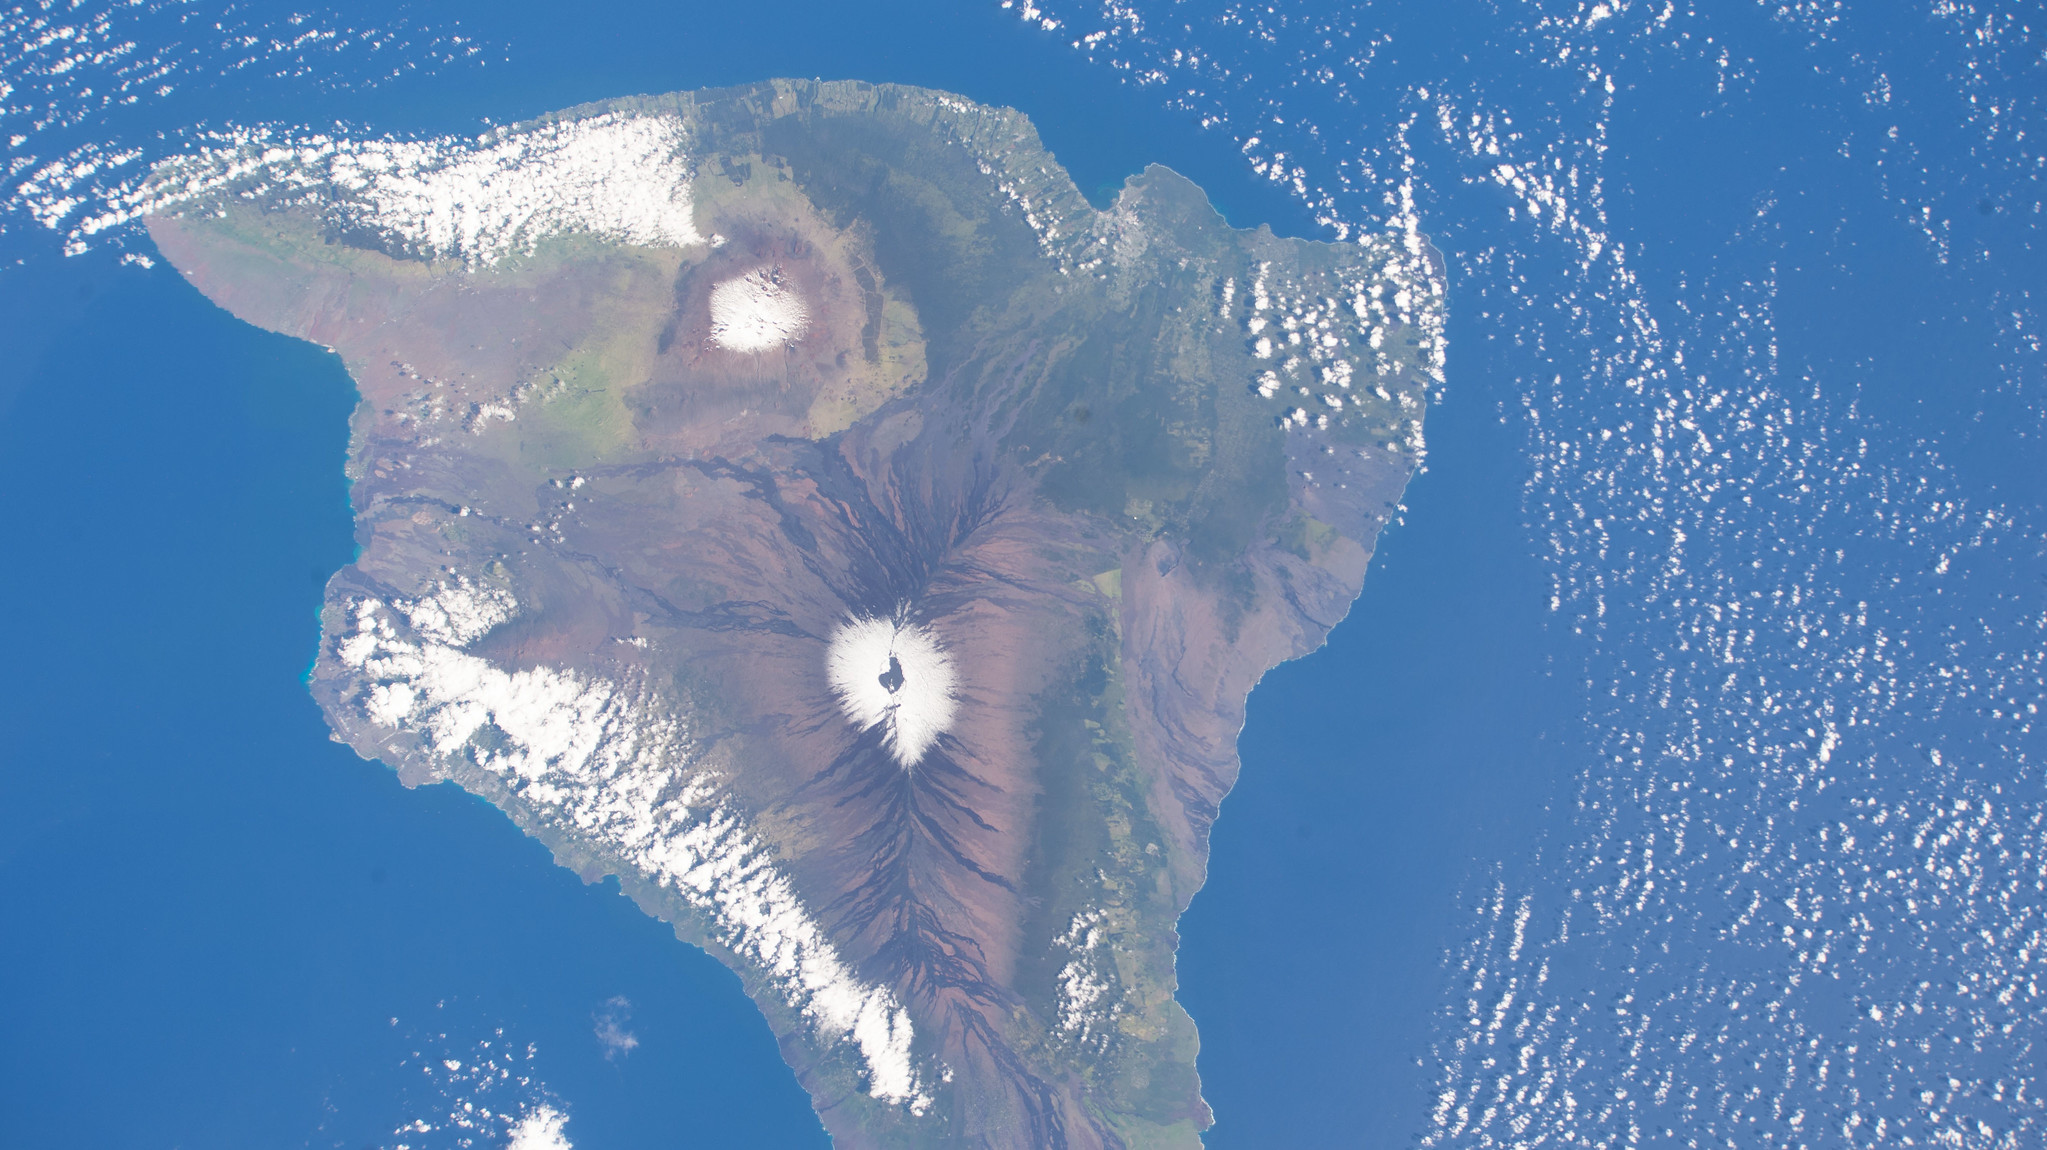 image of the snow-capped peaks of active volcano Mauna Loa, bottom, and dormant volcano Mauna Kea, top, on the island of Hawaii are pictured from the station